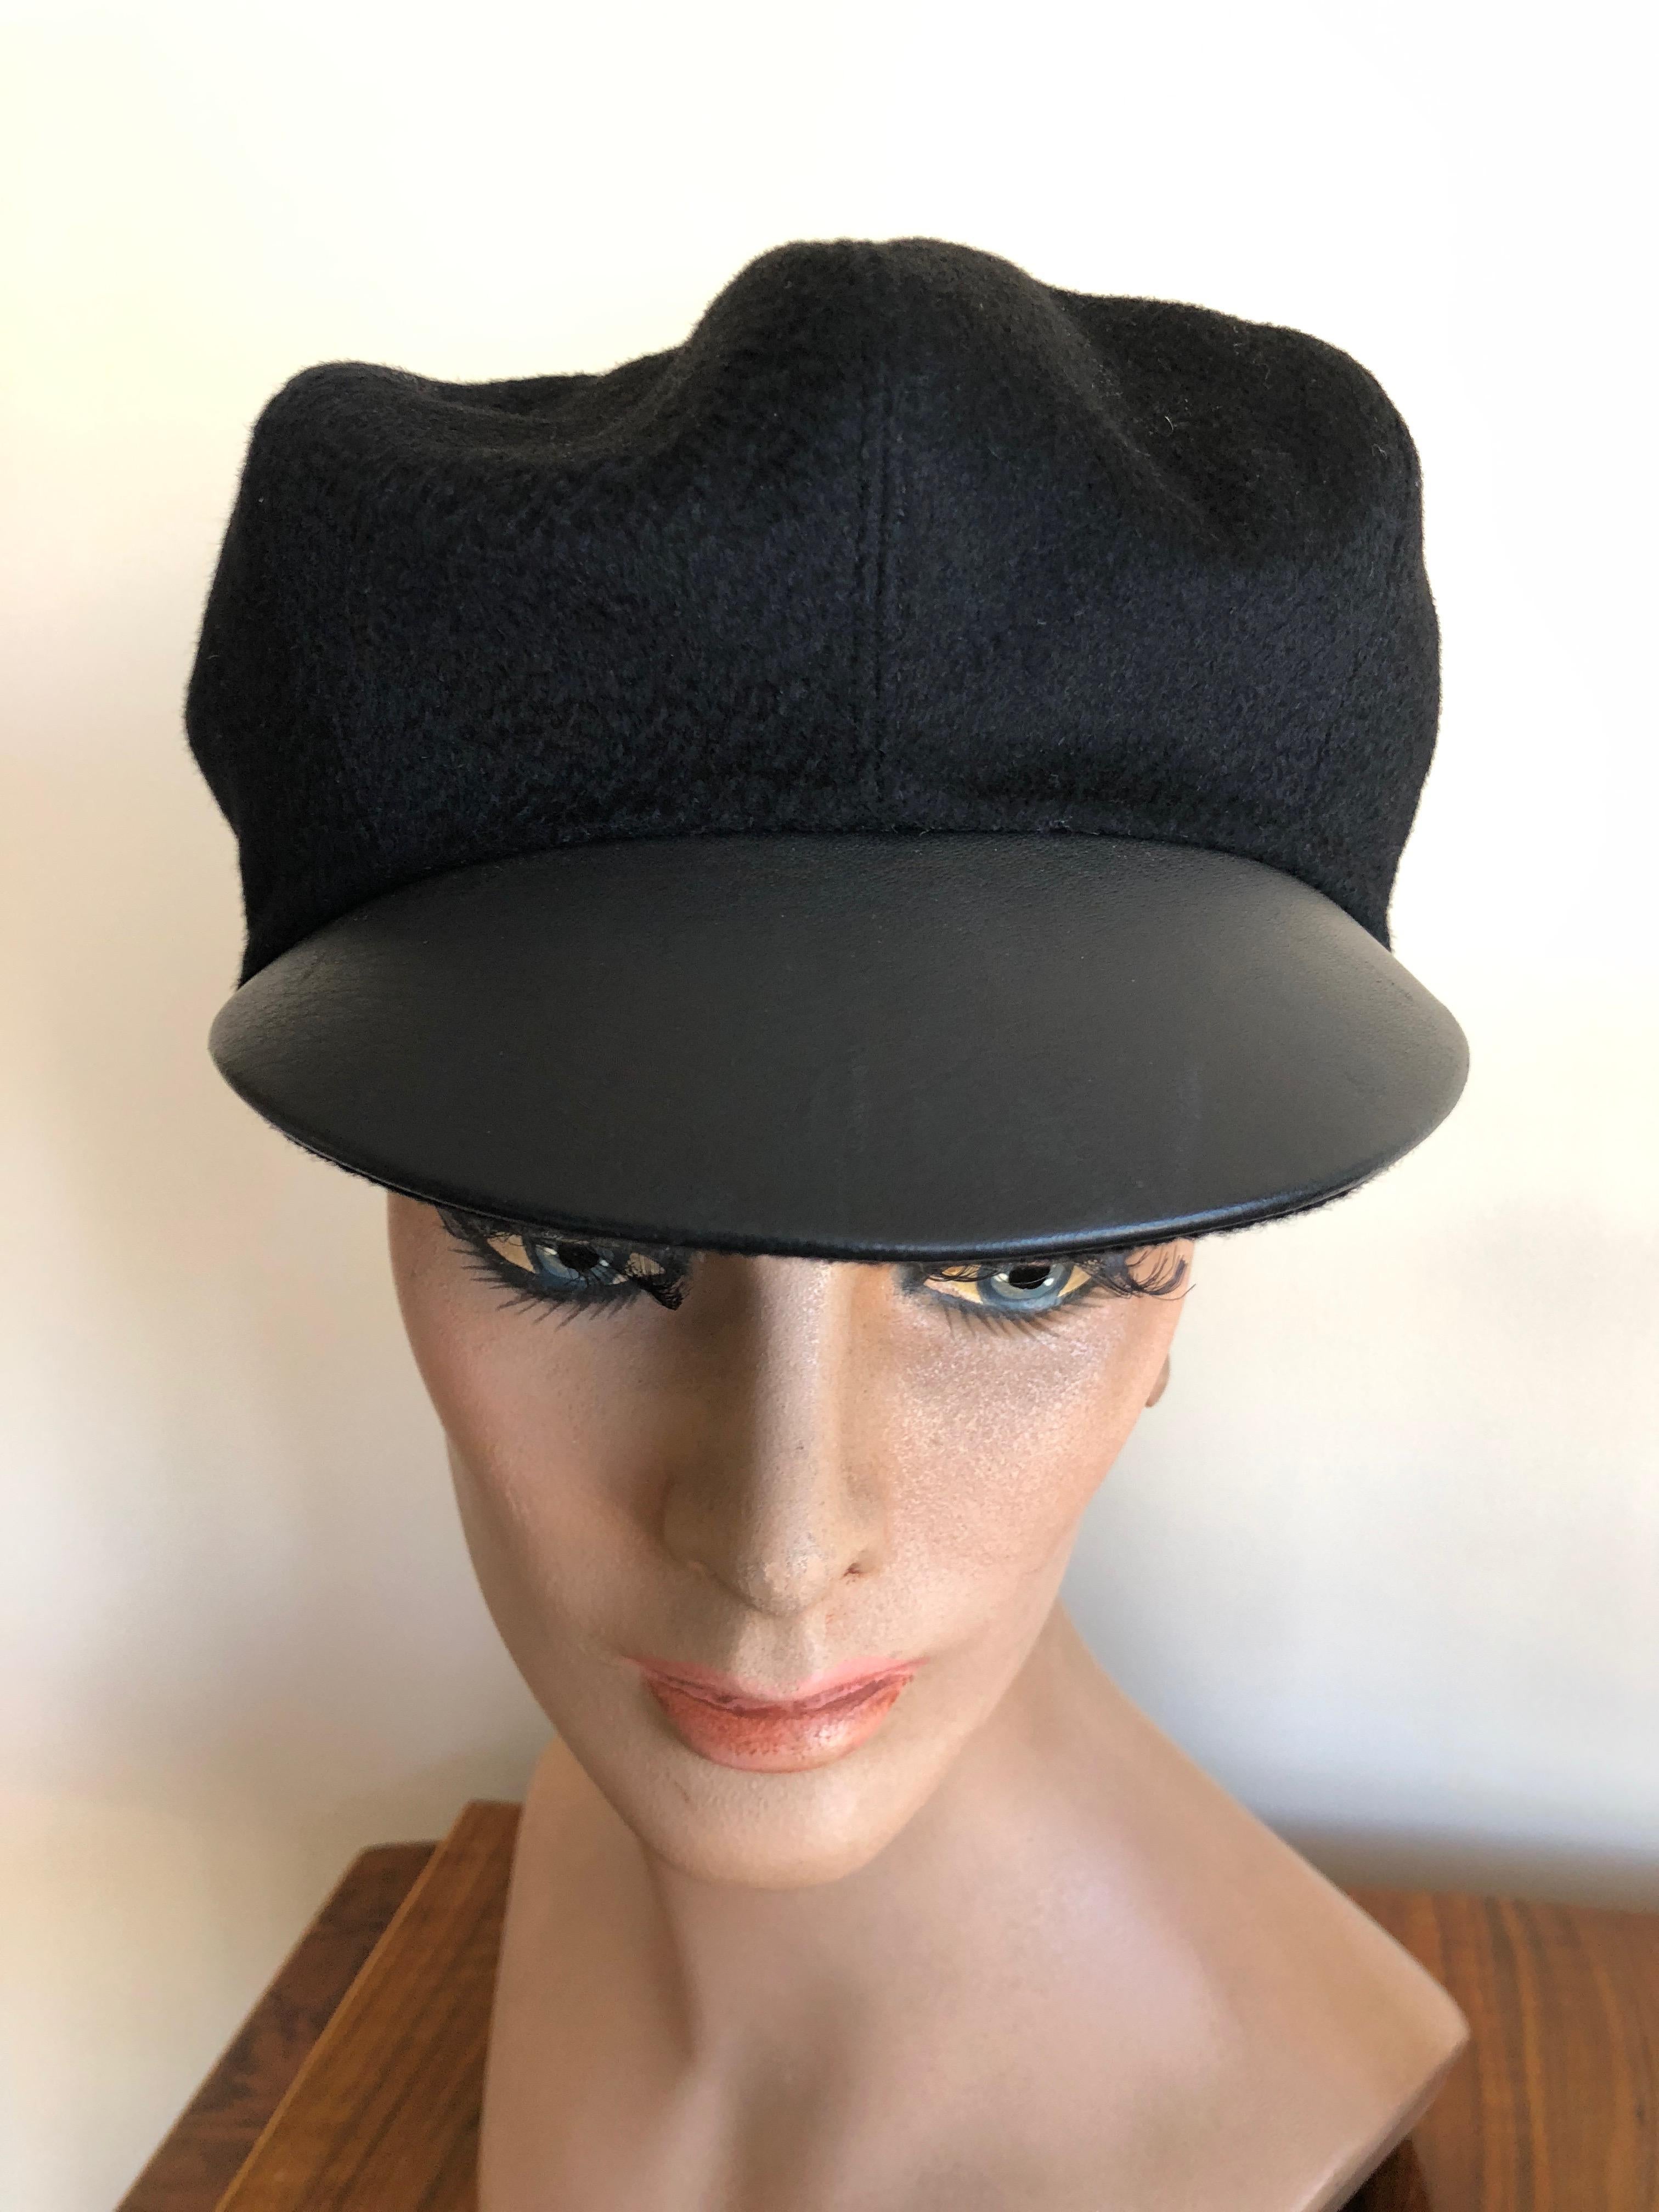 Hermes Black Pure Cashmere Newsboy Hat with Leather Visor  In Excellent Condition For Sale In Cloverdale, CA